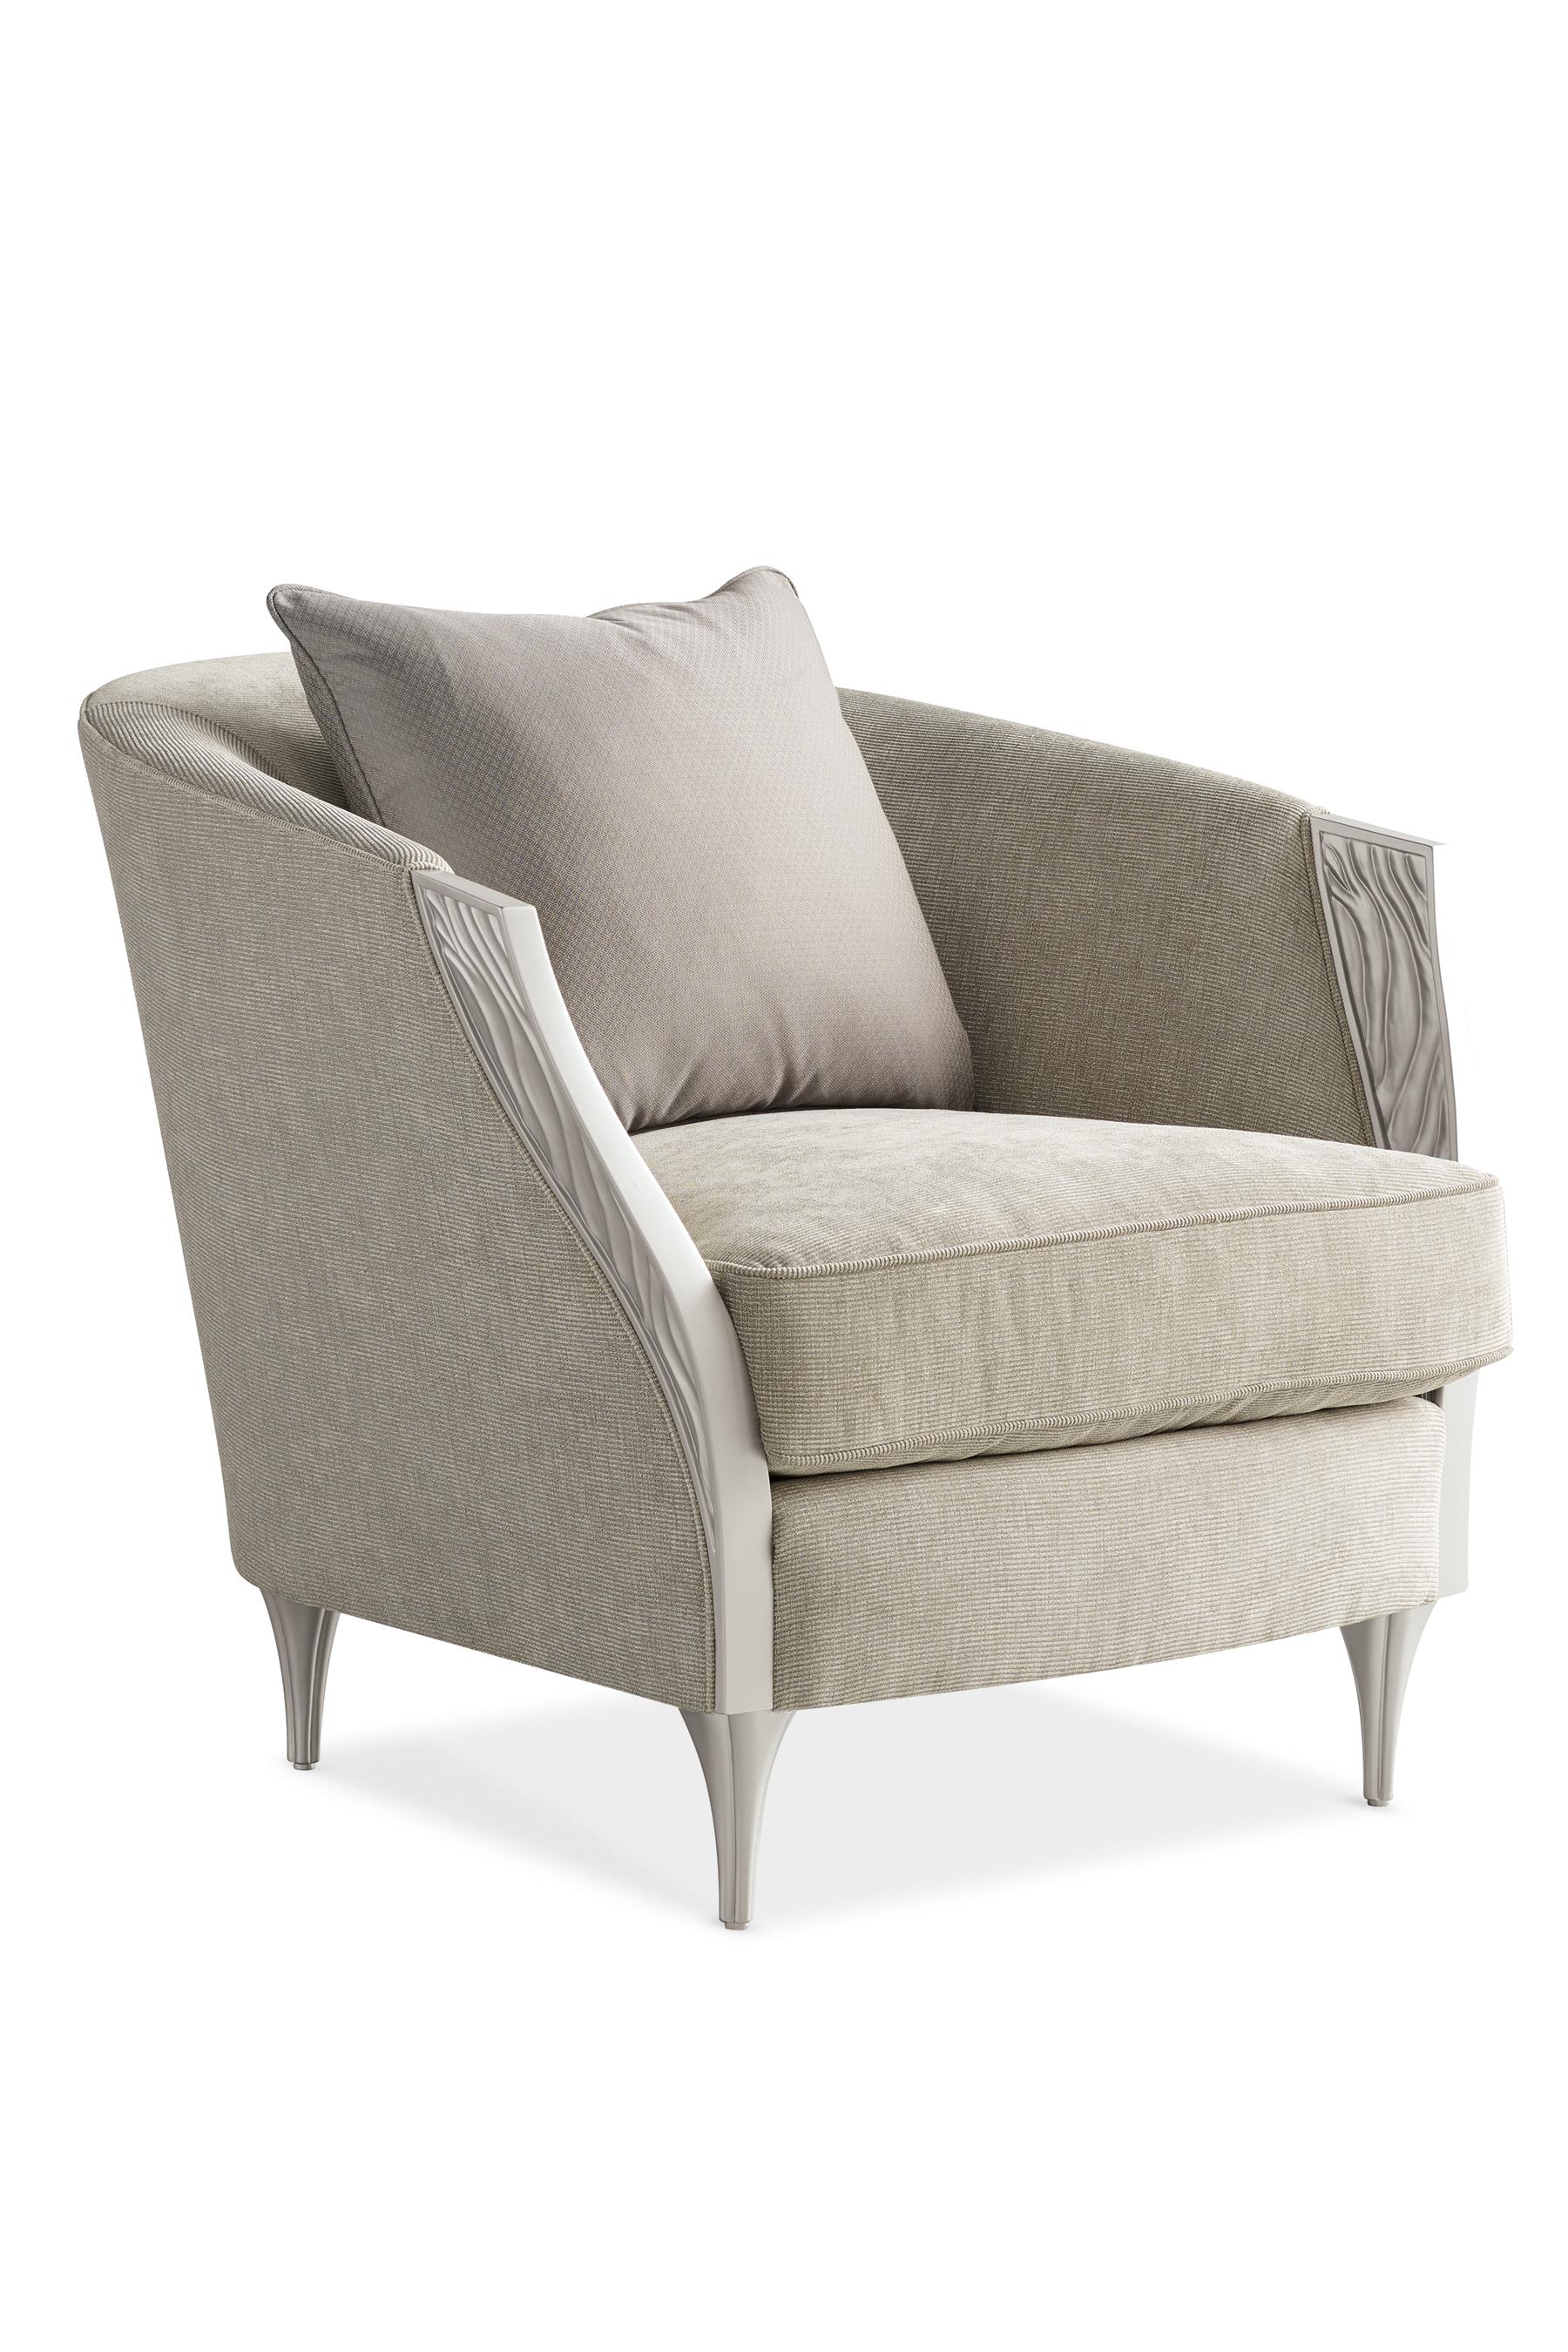 Contemporary Accent Chair CHERYL 9250-004-A in Taupe Fabric